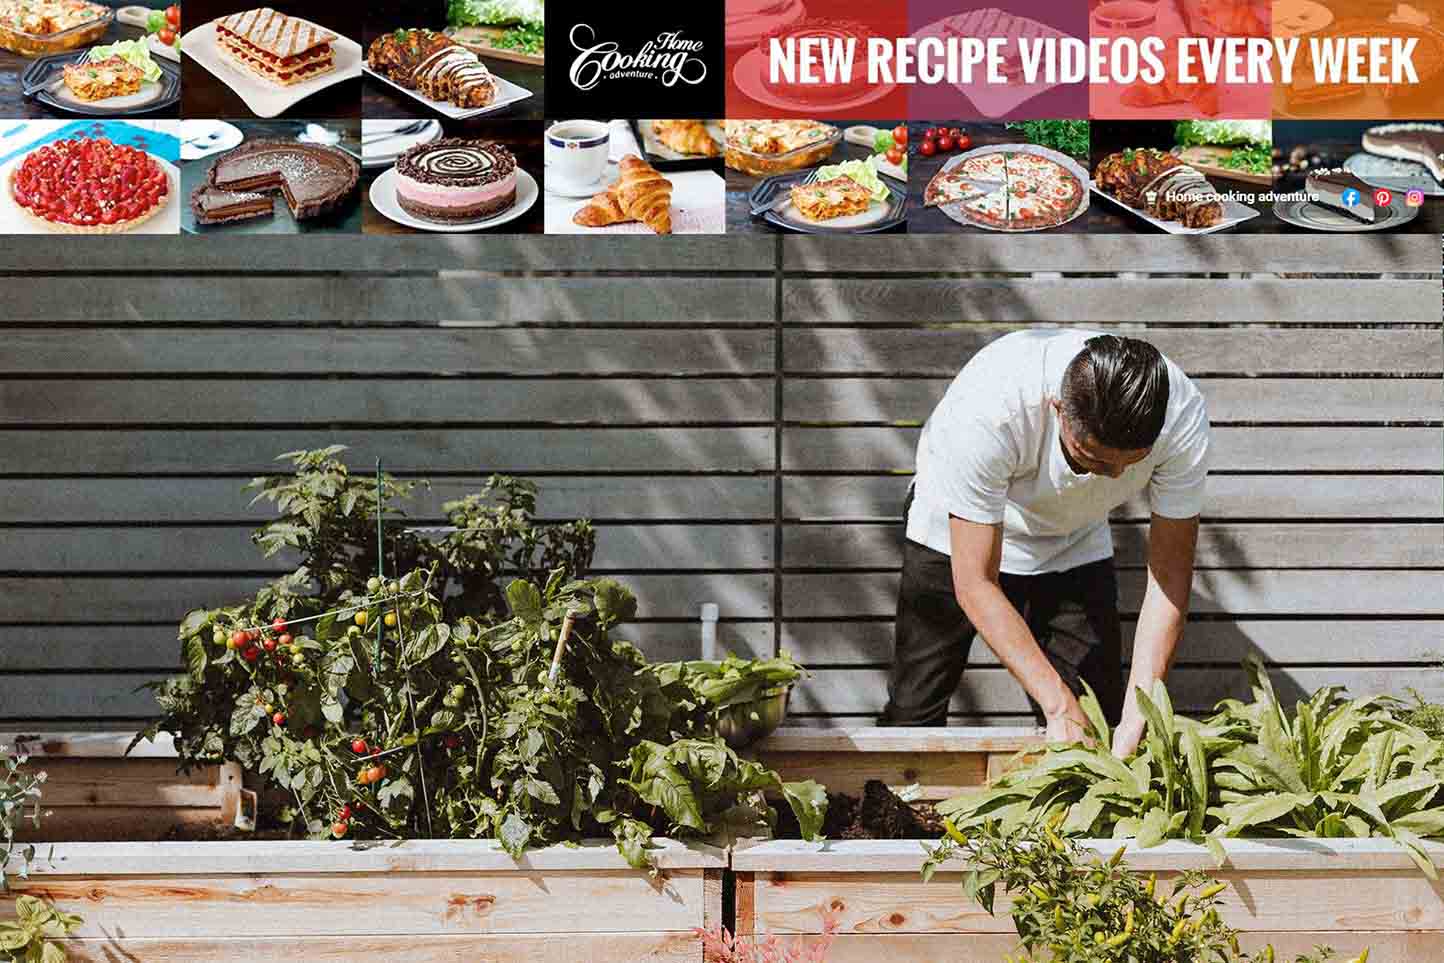 youtube-banner-idea-from-homecooking-channel